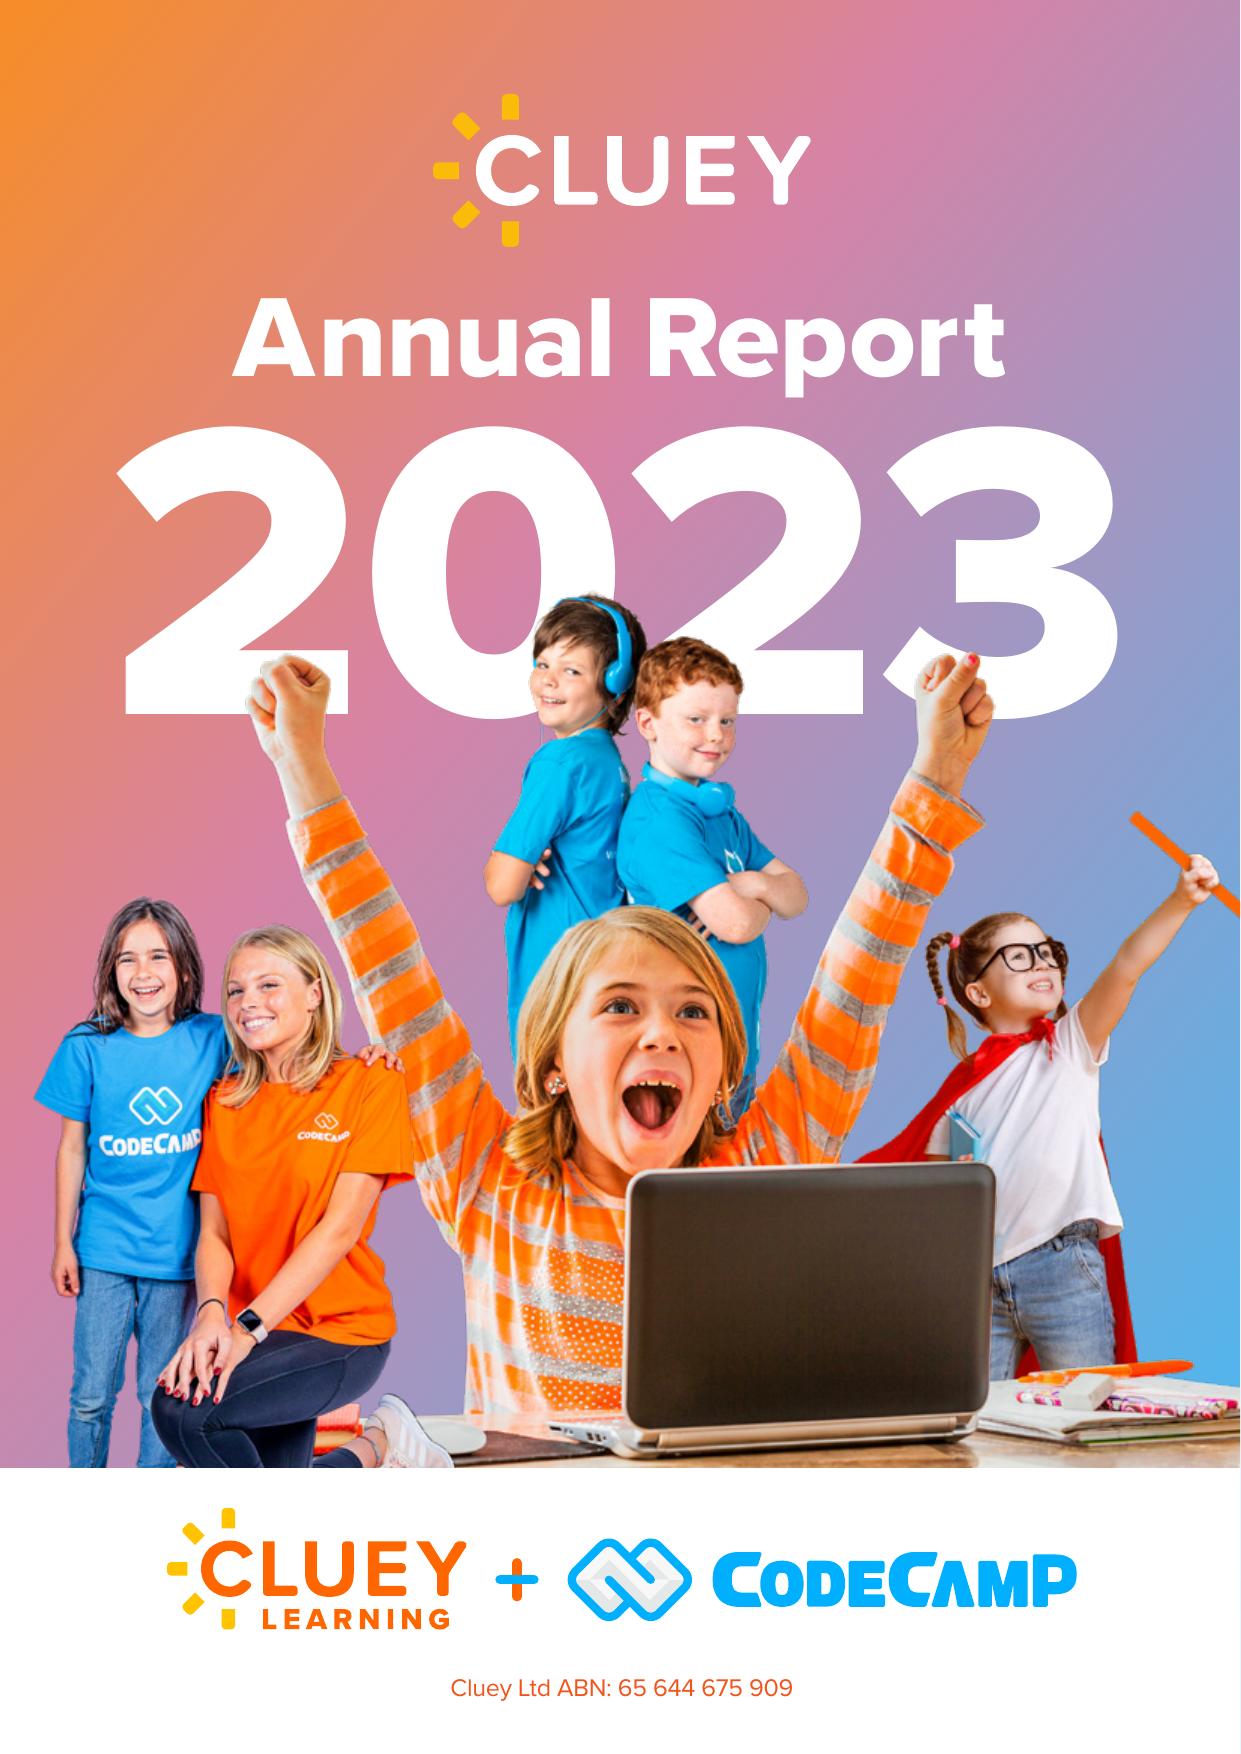 CLUEYLEARNING 2023 Annual Report